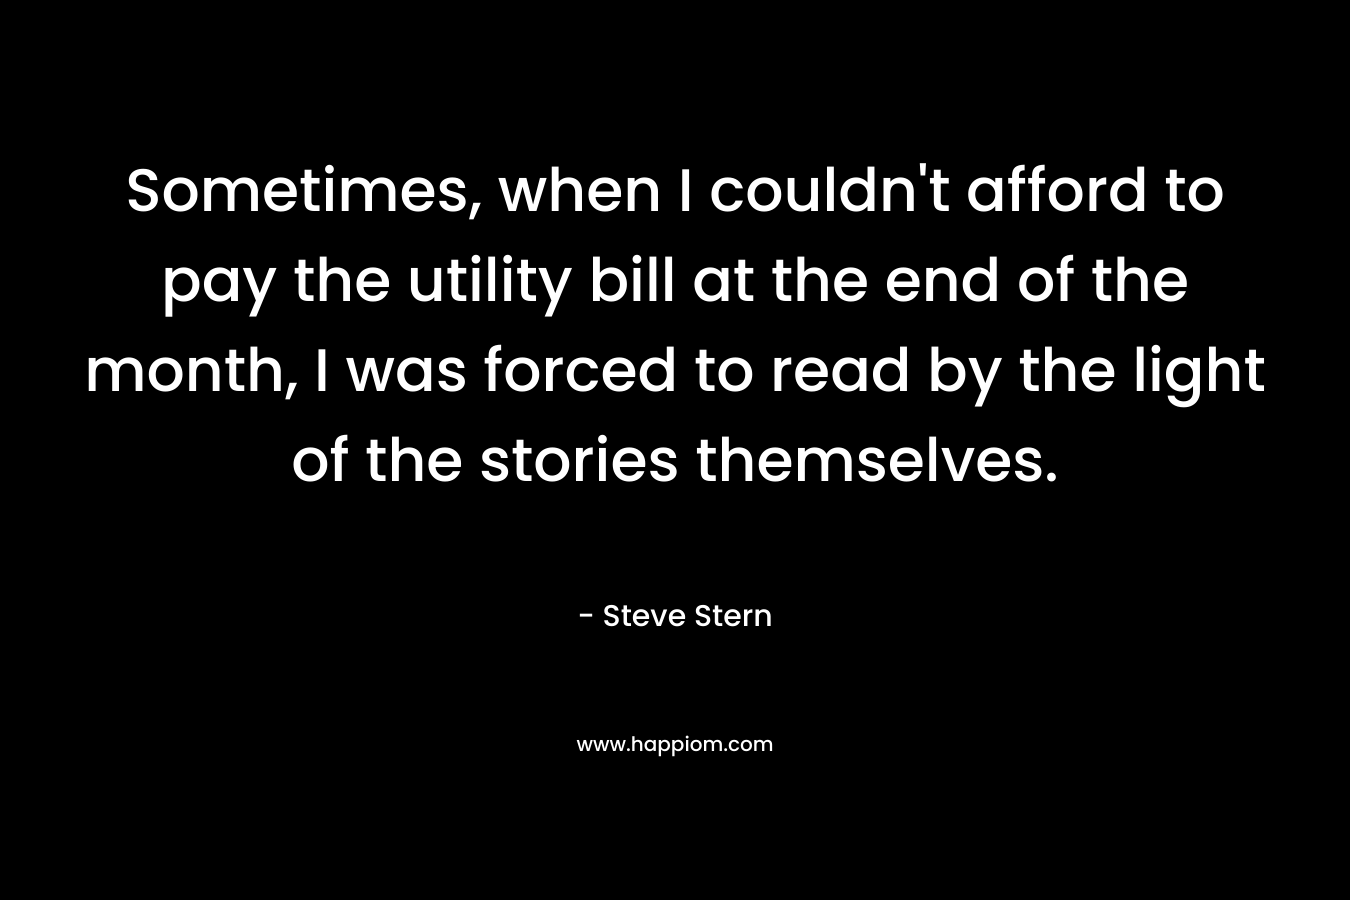 Sometimes, when I couldn’t afford to pay the utility bill at the end of the month, I was forced to read by the light of the stories themselves. – Steve Stern